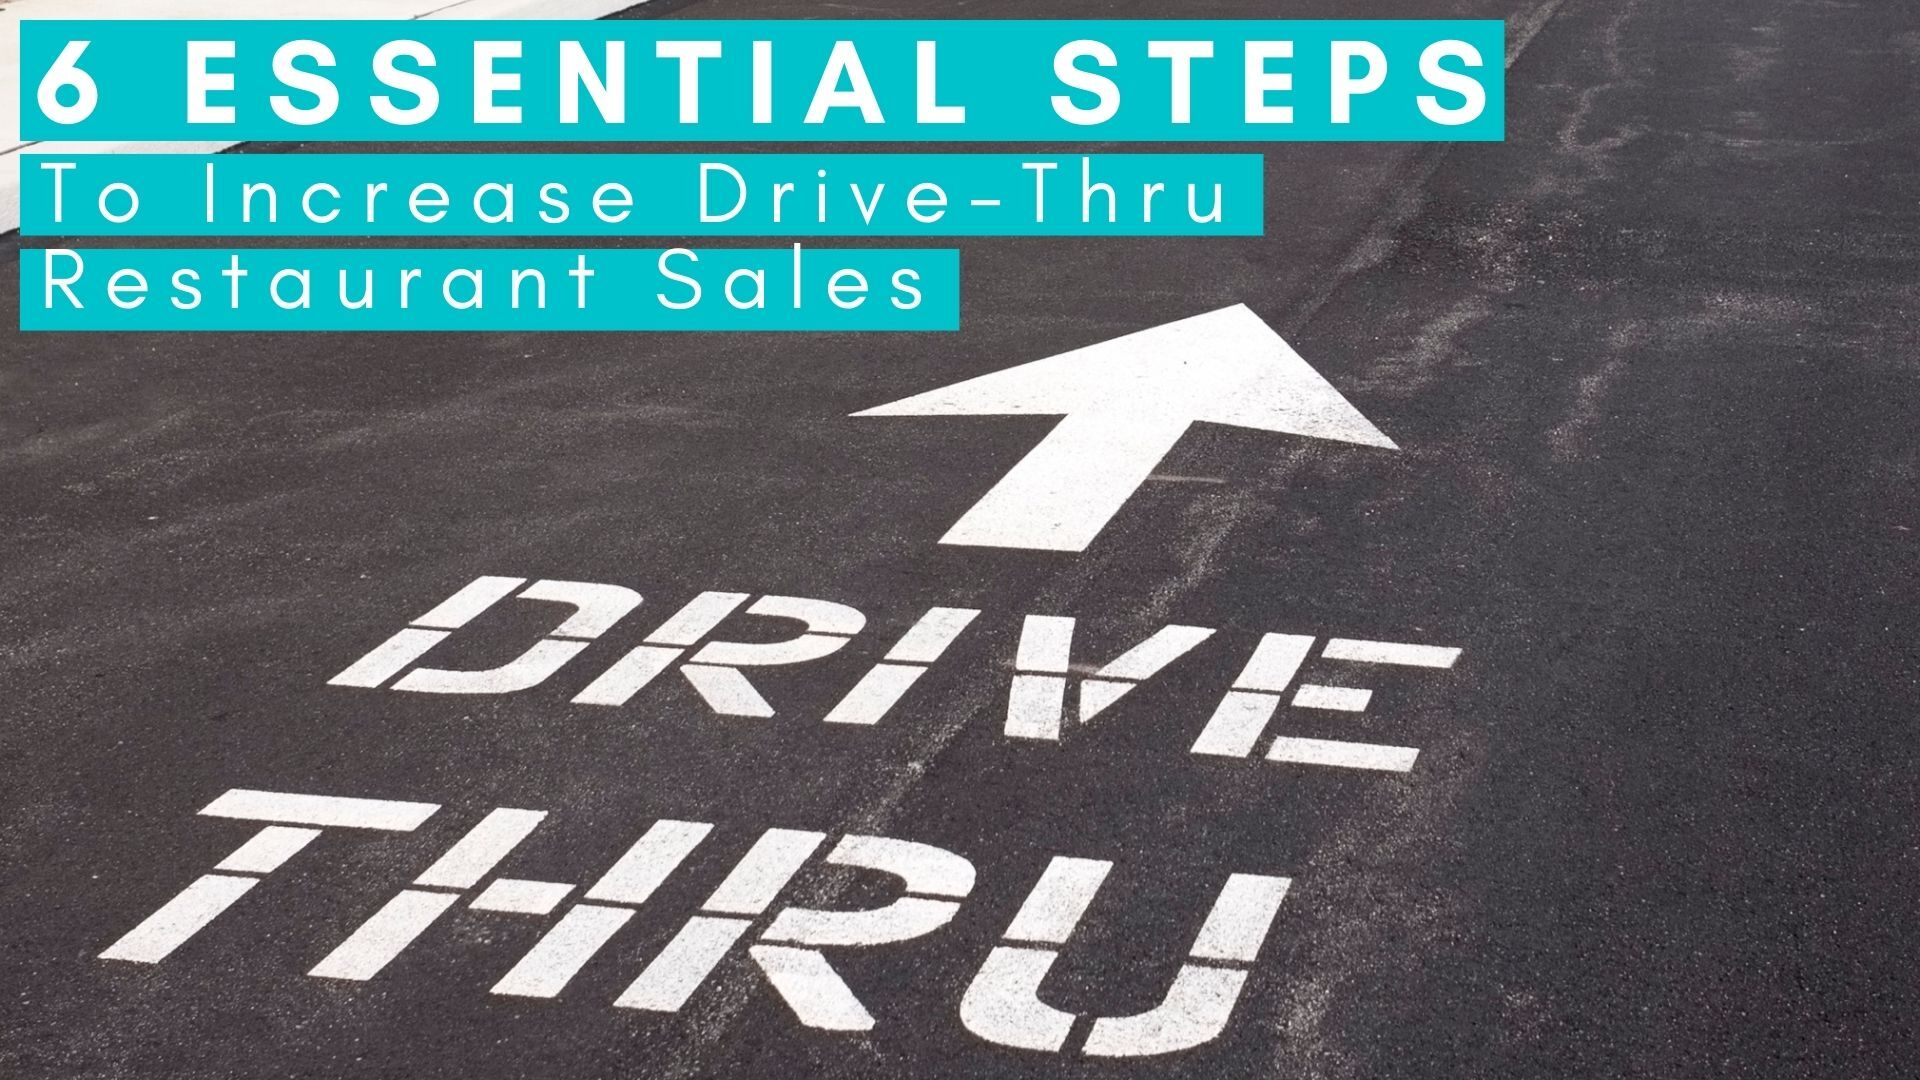 You are currently viewing 6 Essential Steps to Increase Drive-Thru Restaurant Sales